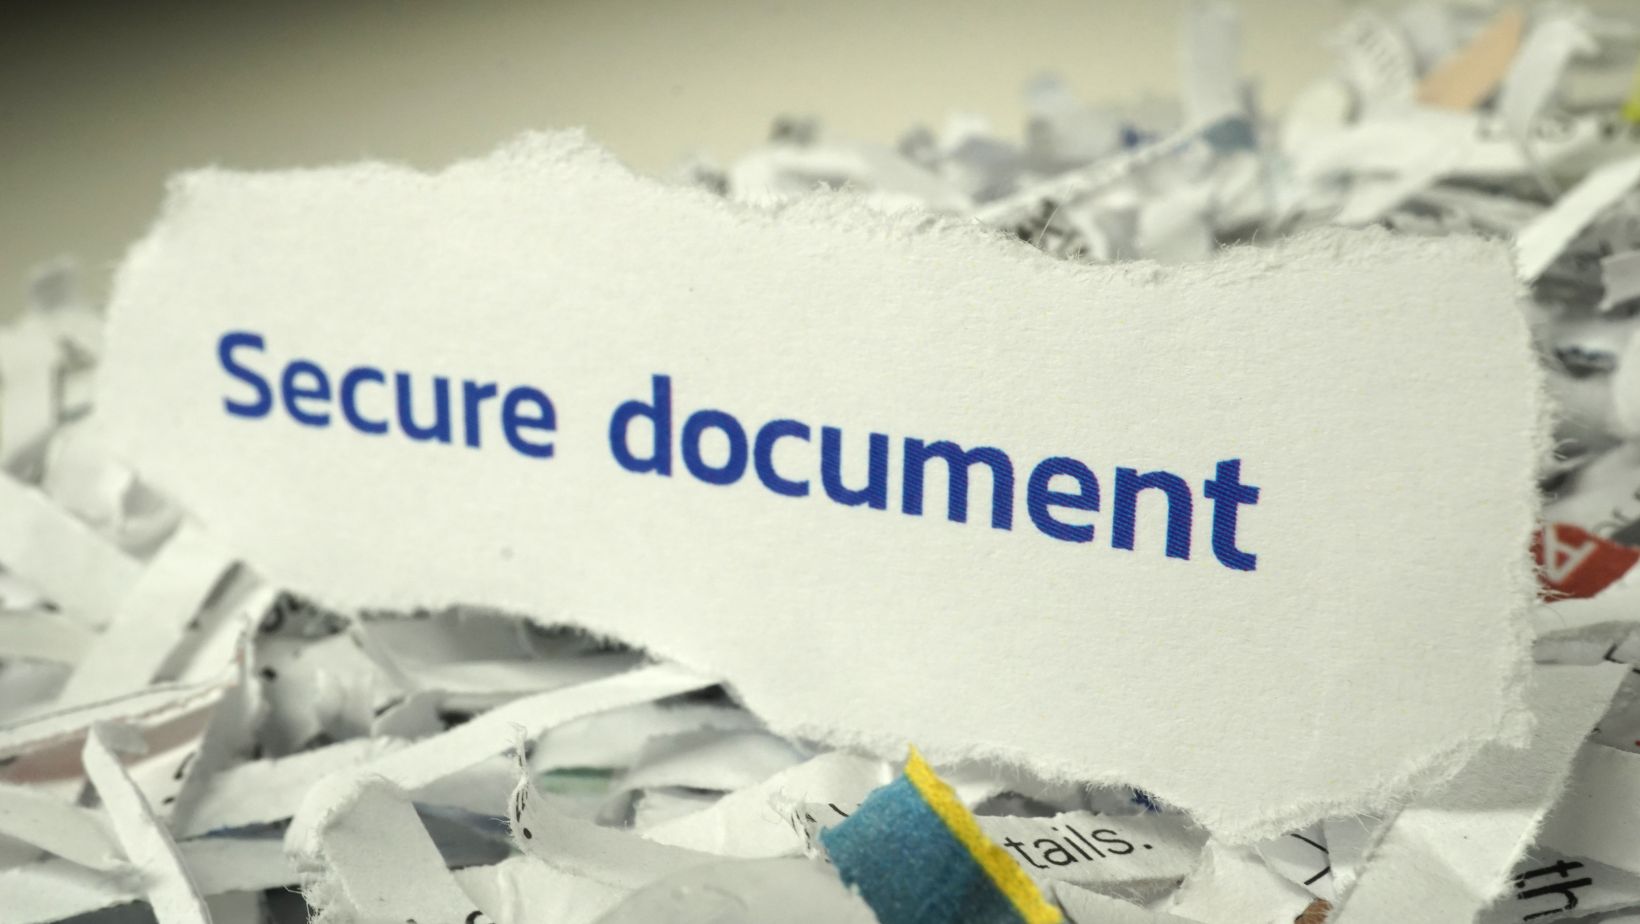 Shredded paper that says "Secure Document"